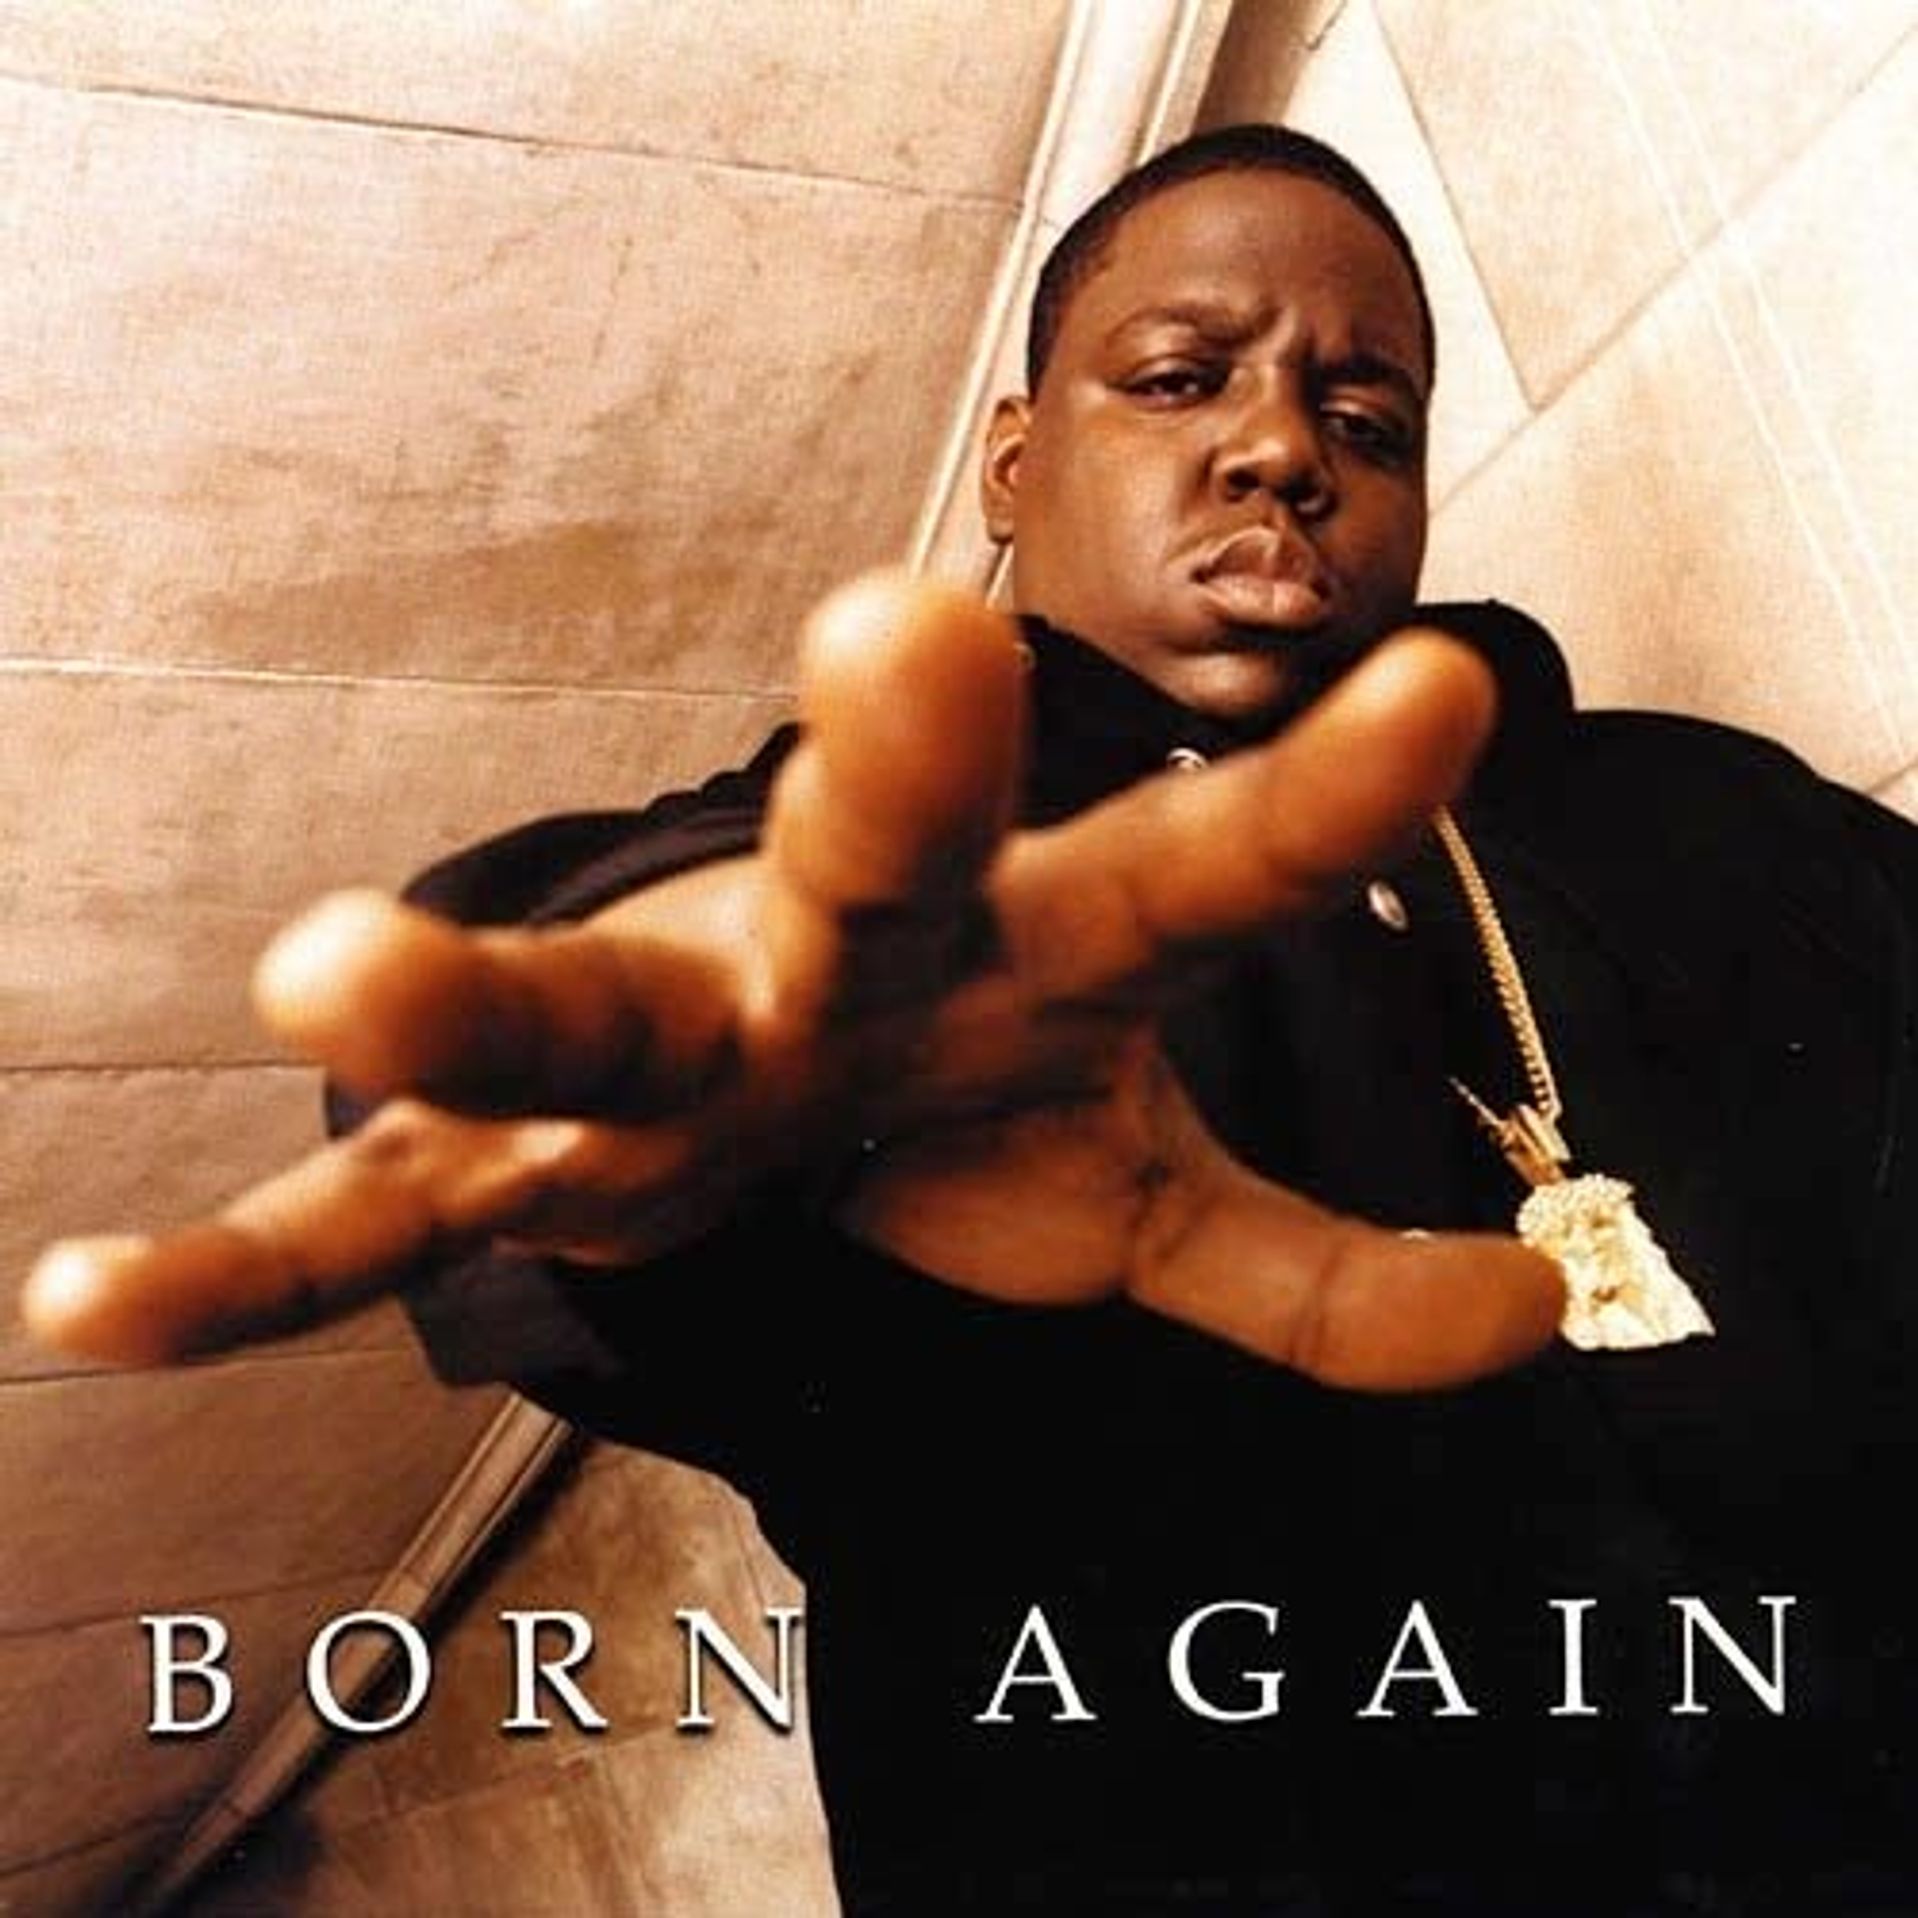 Album Title: Born Again by: The Notorious BIG